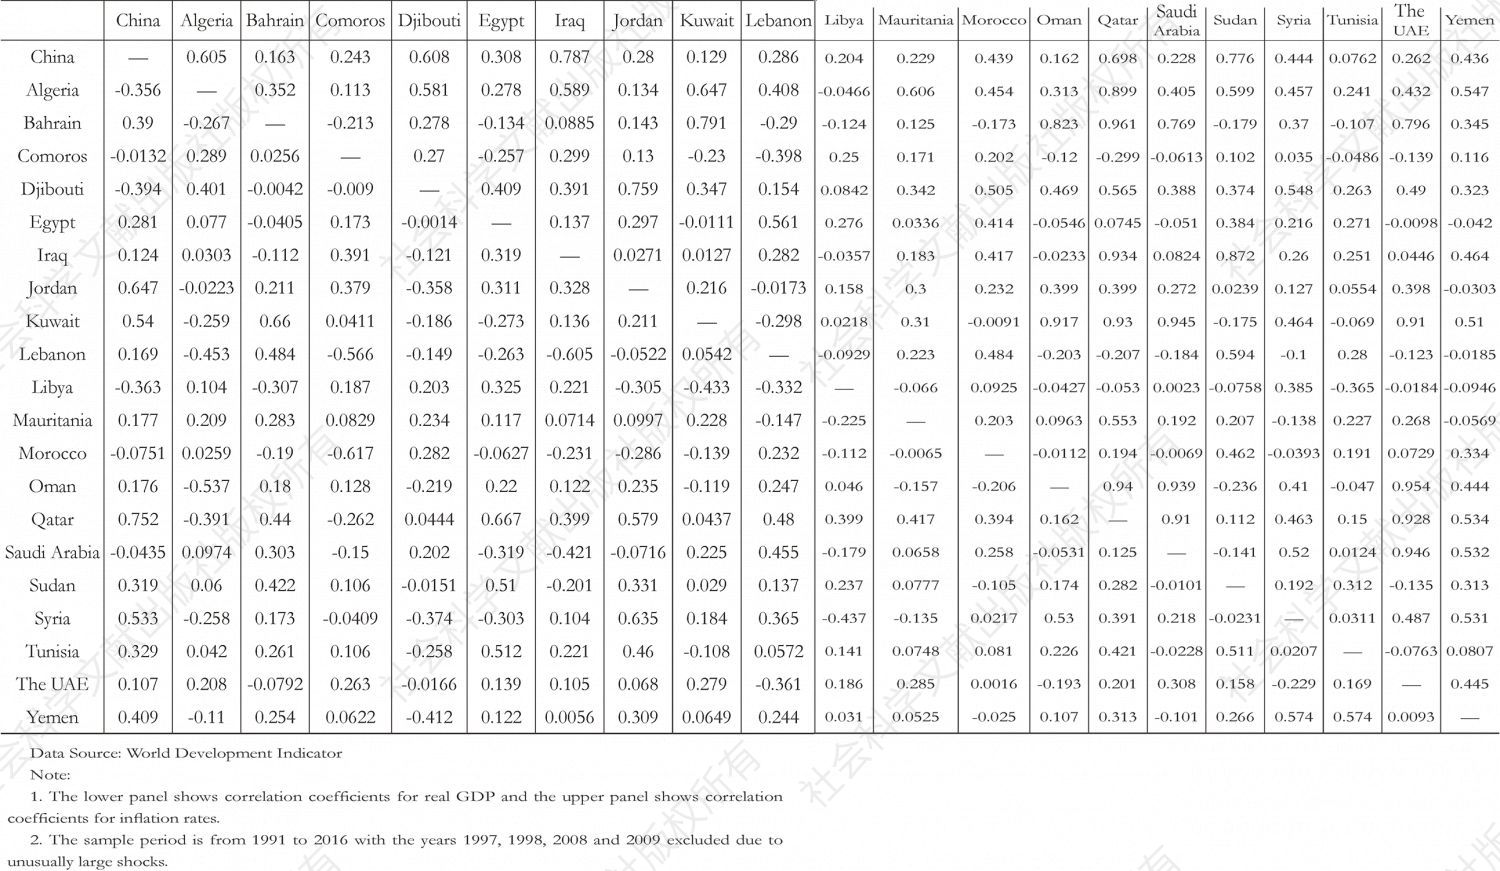 Table 7 Correlation Matrix of Real GDP Growth Rate (Lower Panel) and Inflation Rate (Upper Panel)